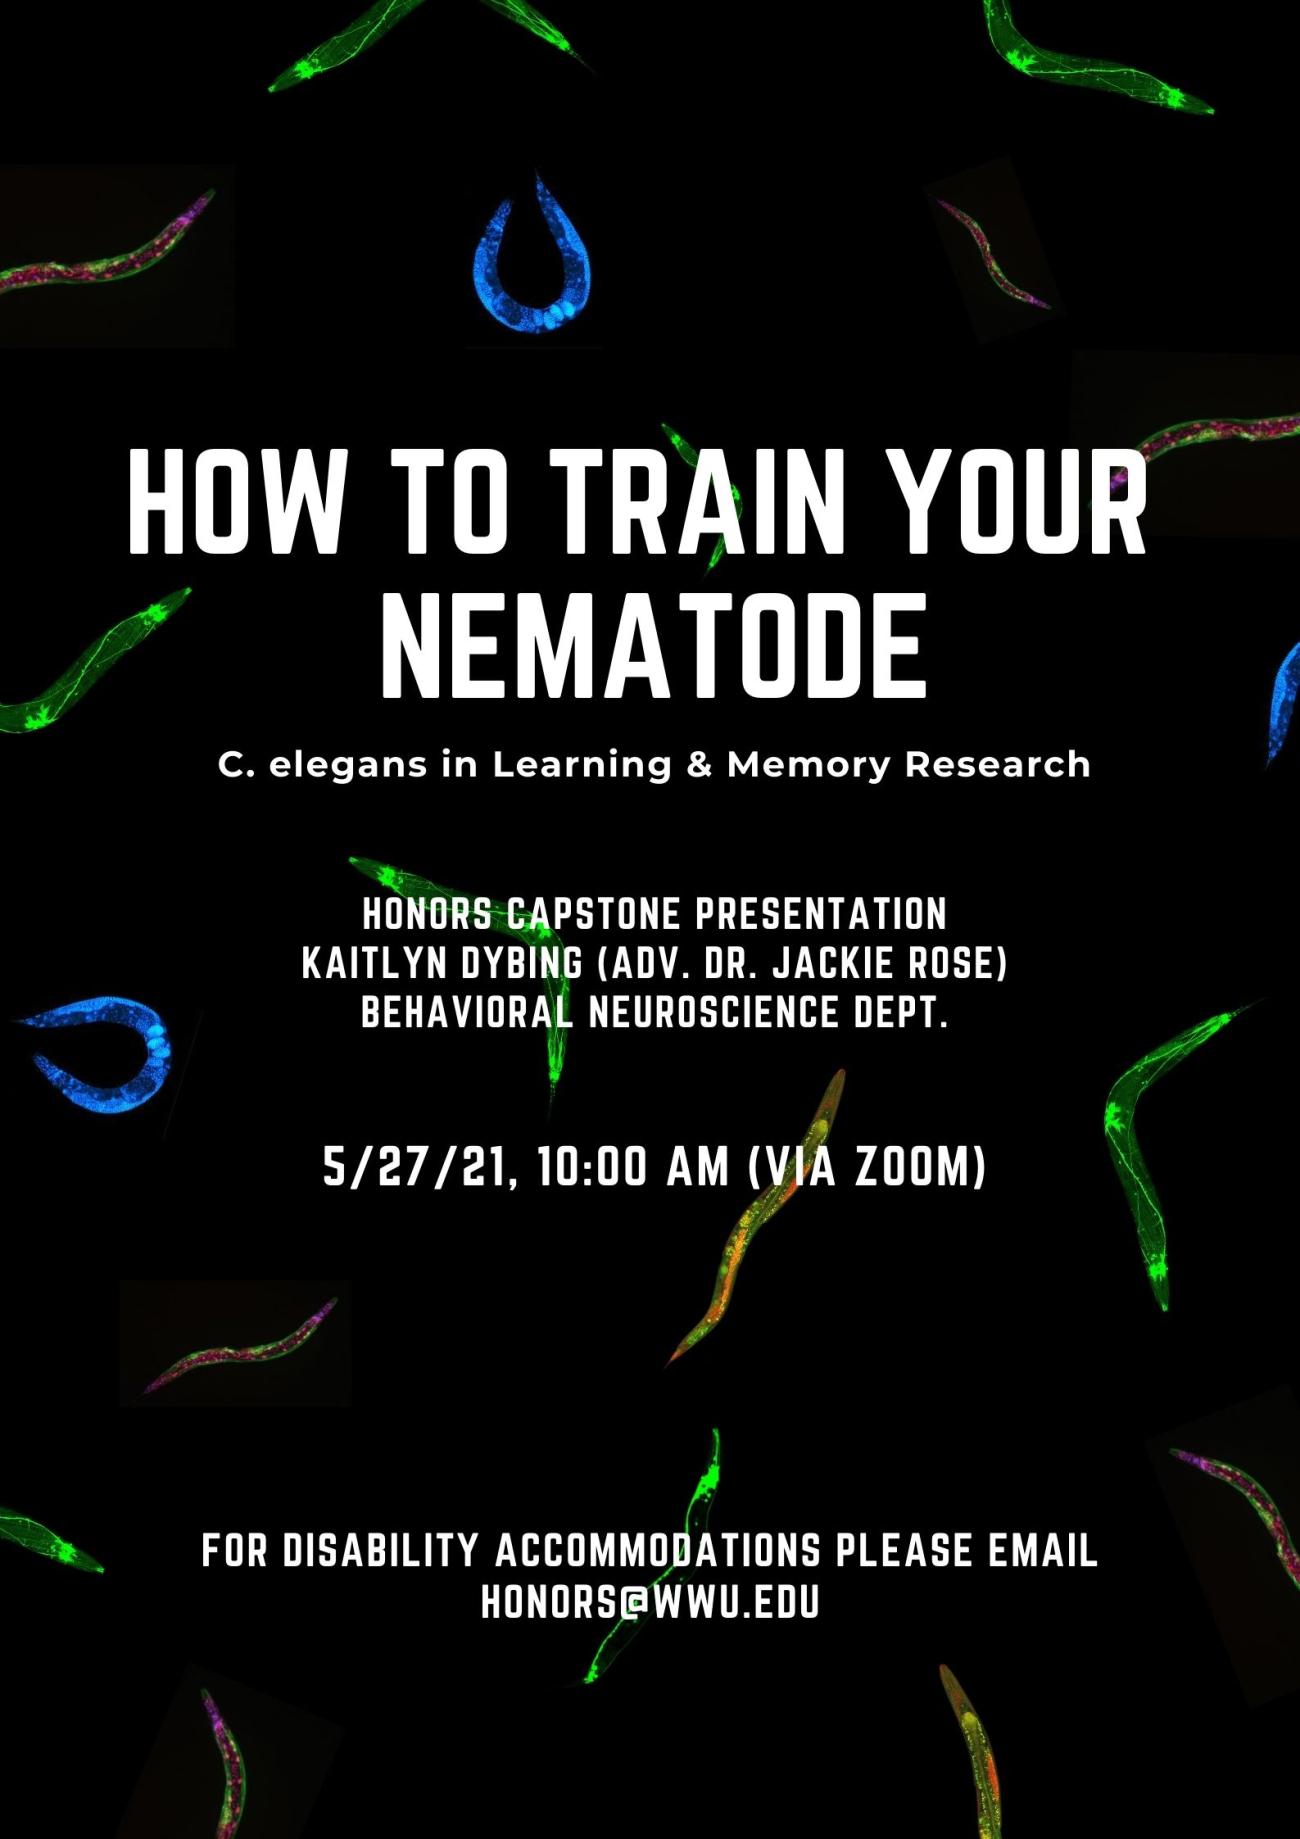 Black poster with multicolored neon images of C. elegans scattered across the background. White text reads “How to Train Your Nematode: C. elegans in Learning and Memory Research. Honors Capstone Presentation by Kaitlyn Dybing, advised by Dr. Jackie Rose from the Behavioral Neuroscience department. Thursday, May 27th at 10:00 AM via Zoom. For disability accommodations please contact honors@wwu.edu”.